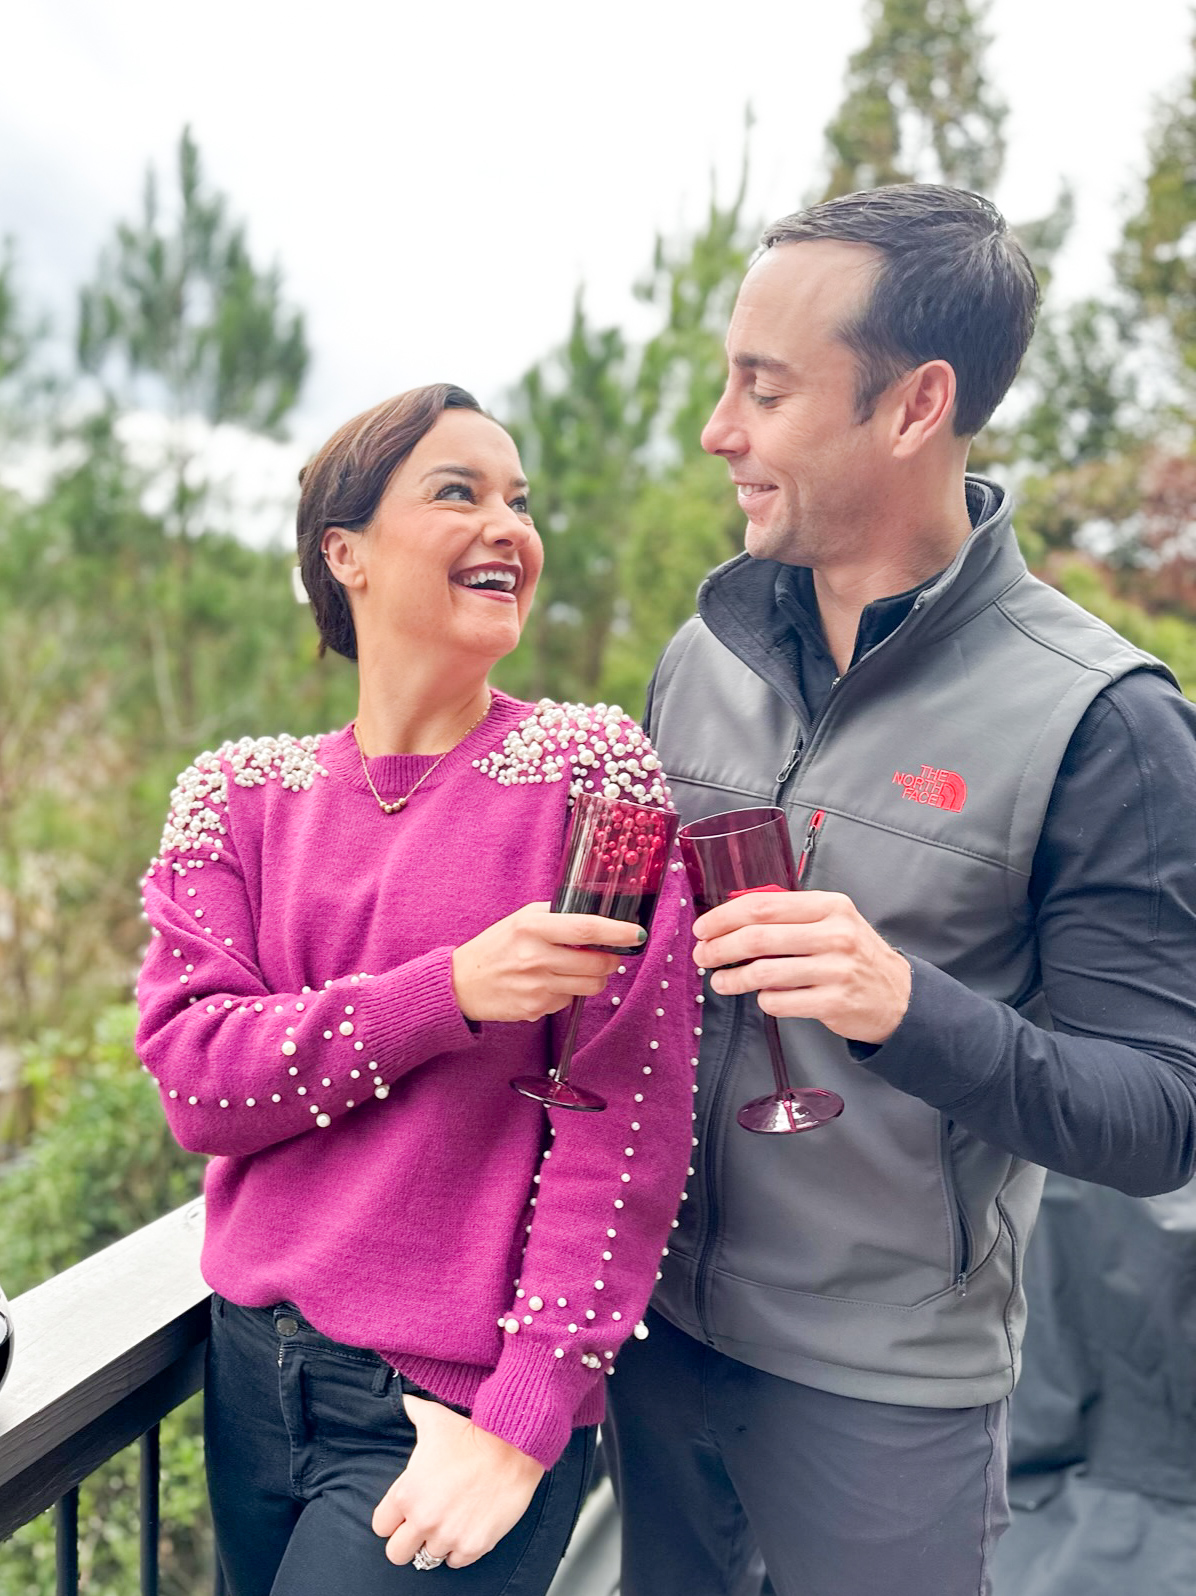 Christian Birmingham podcaster & health coach, Heather Brown, shares the best questions for date night at home with your spouse.